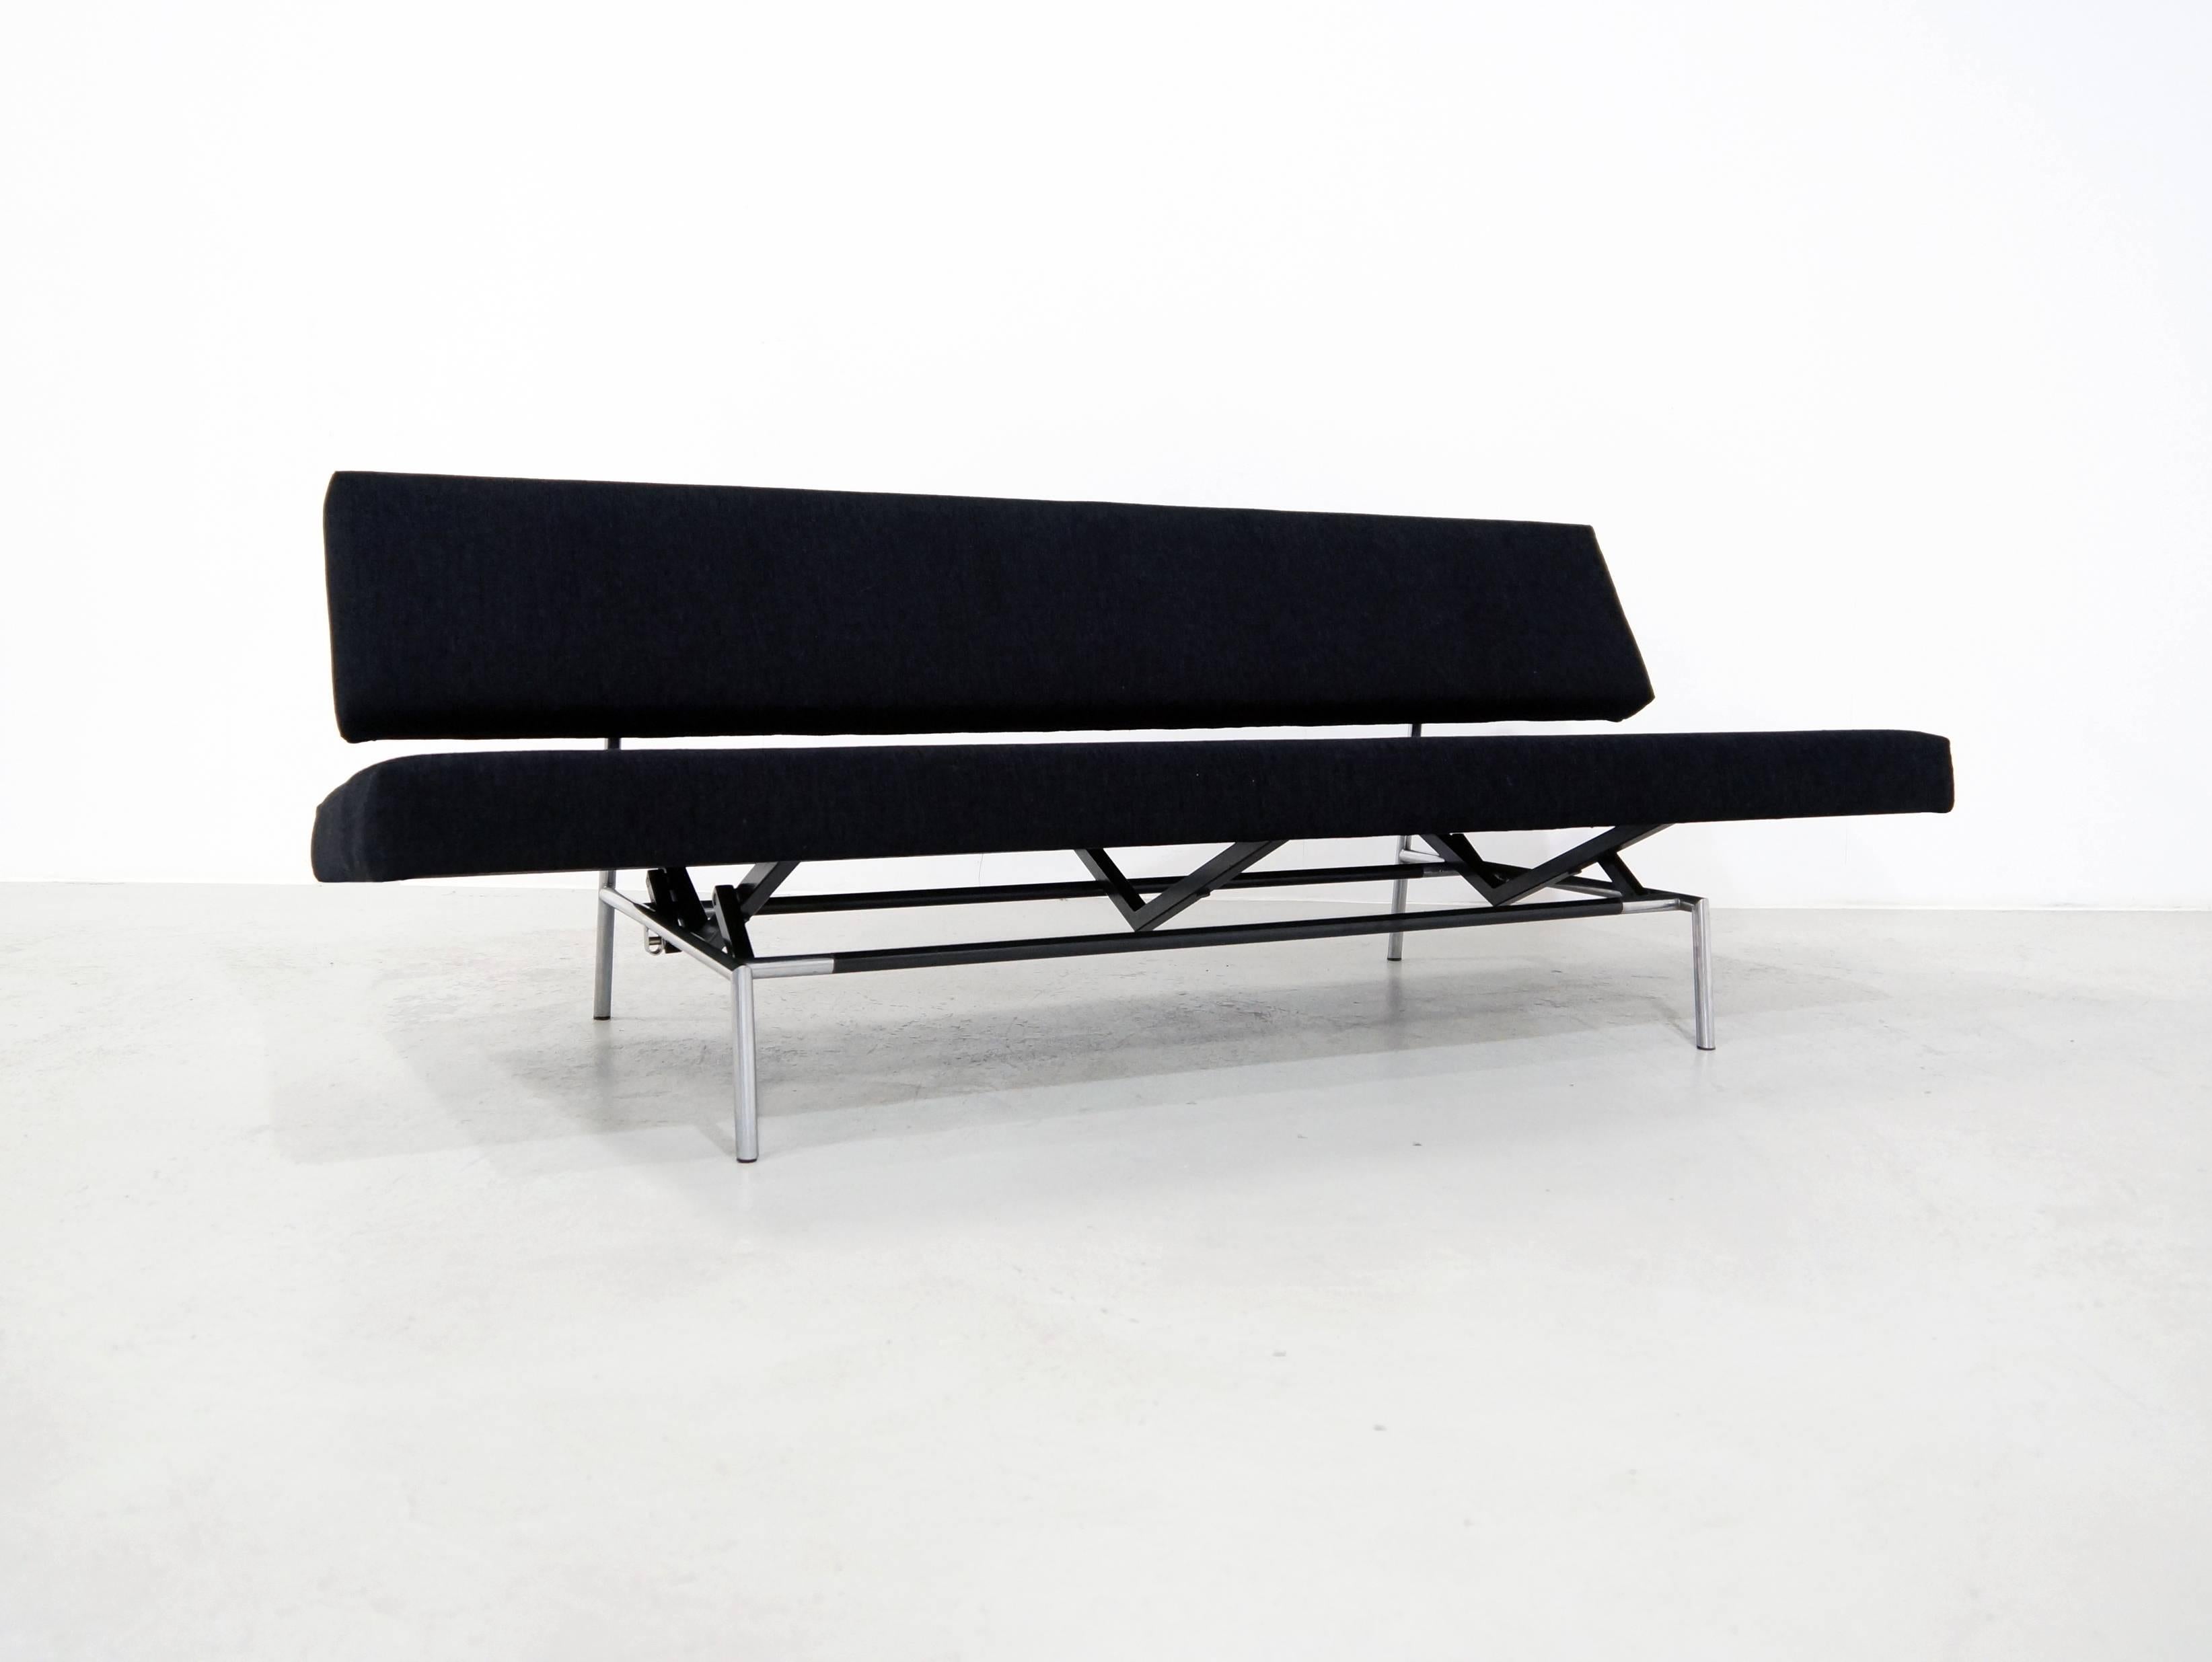 In 1958 Martin Visser designed this Minimalistic Rectangular daybed - Sofa for Spectrum, Bergeijk. 
Spectrum is a Dutch manufacturer of mainly chairs, sofas and some cabinets. This sofa is an early edition with metal frame and stainless steel Frame